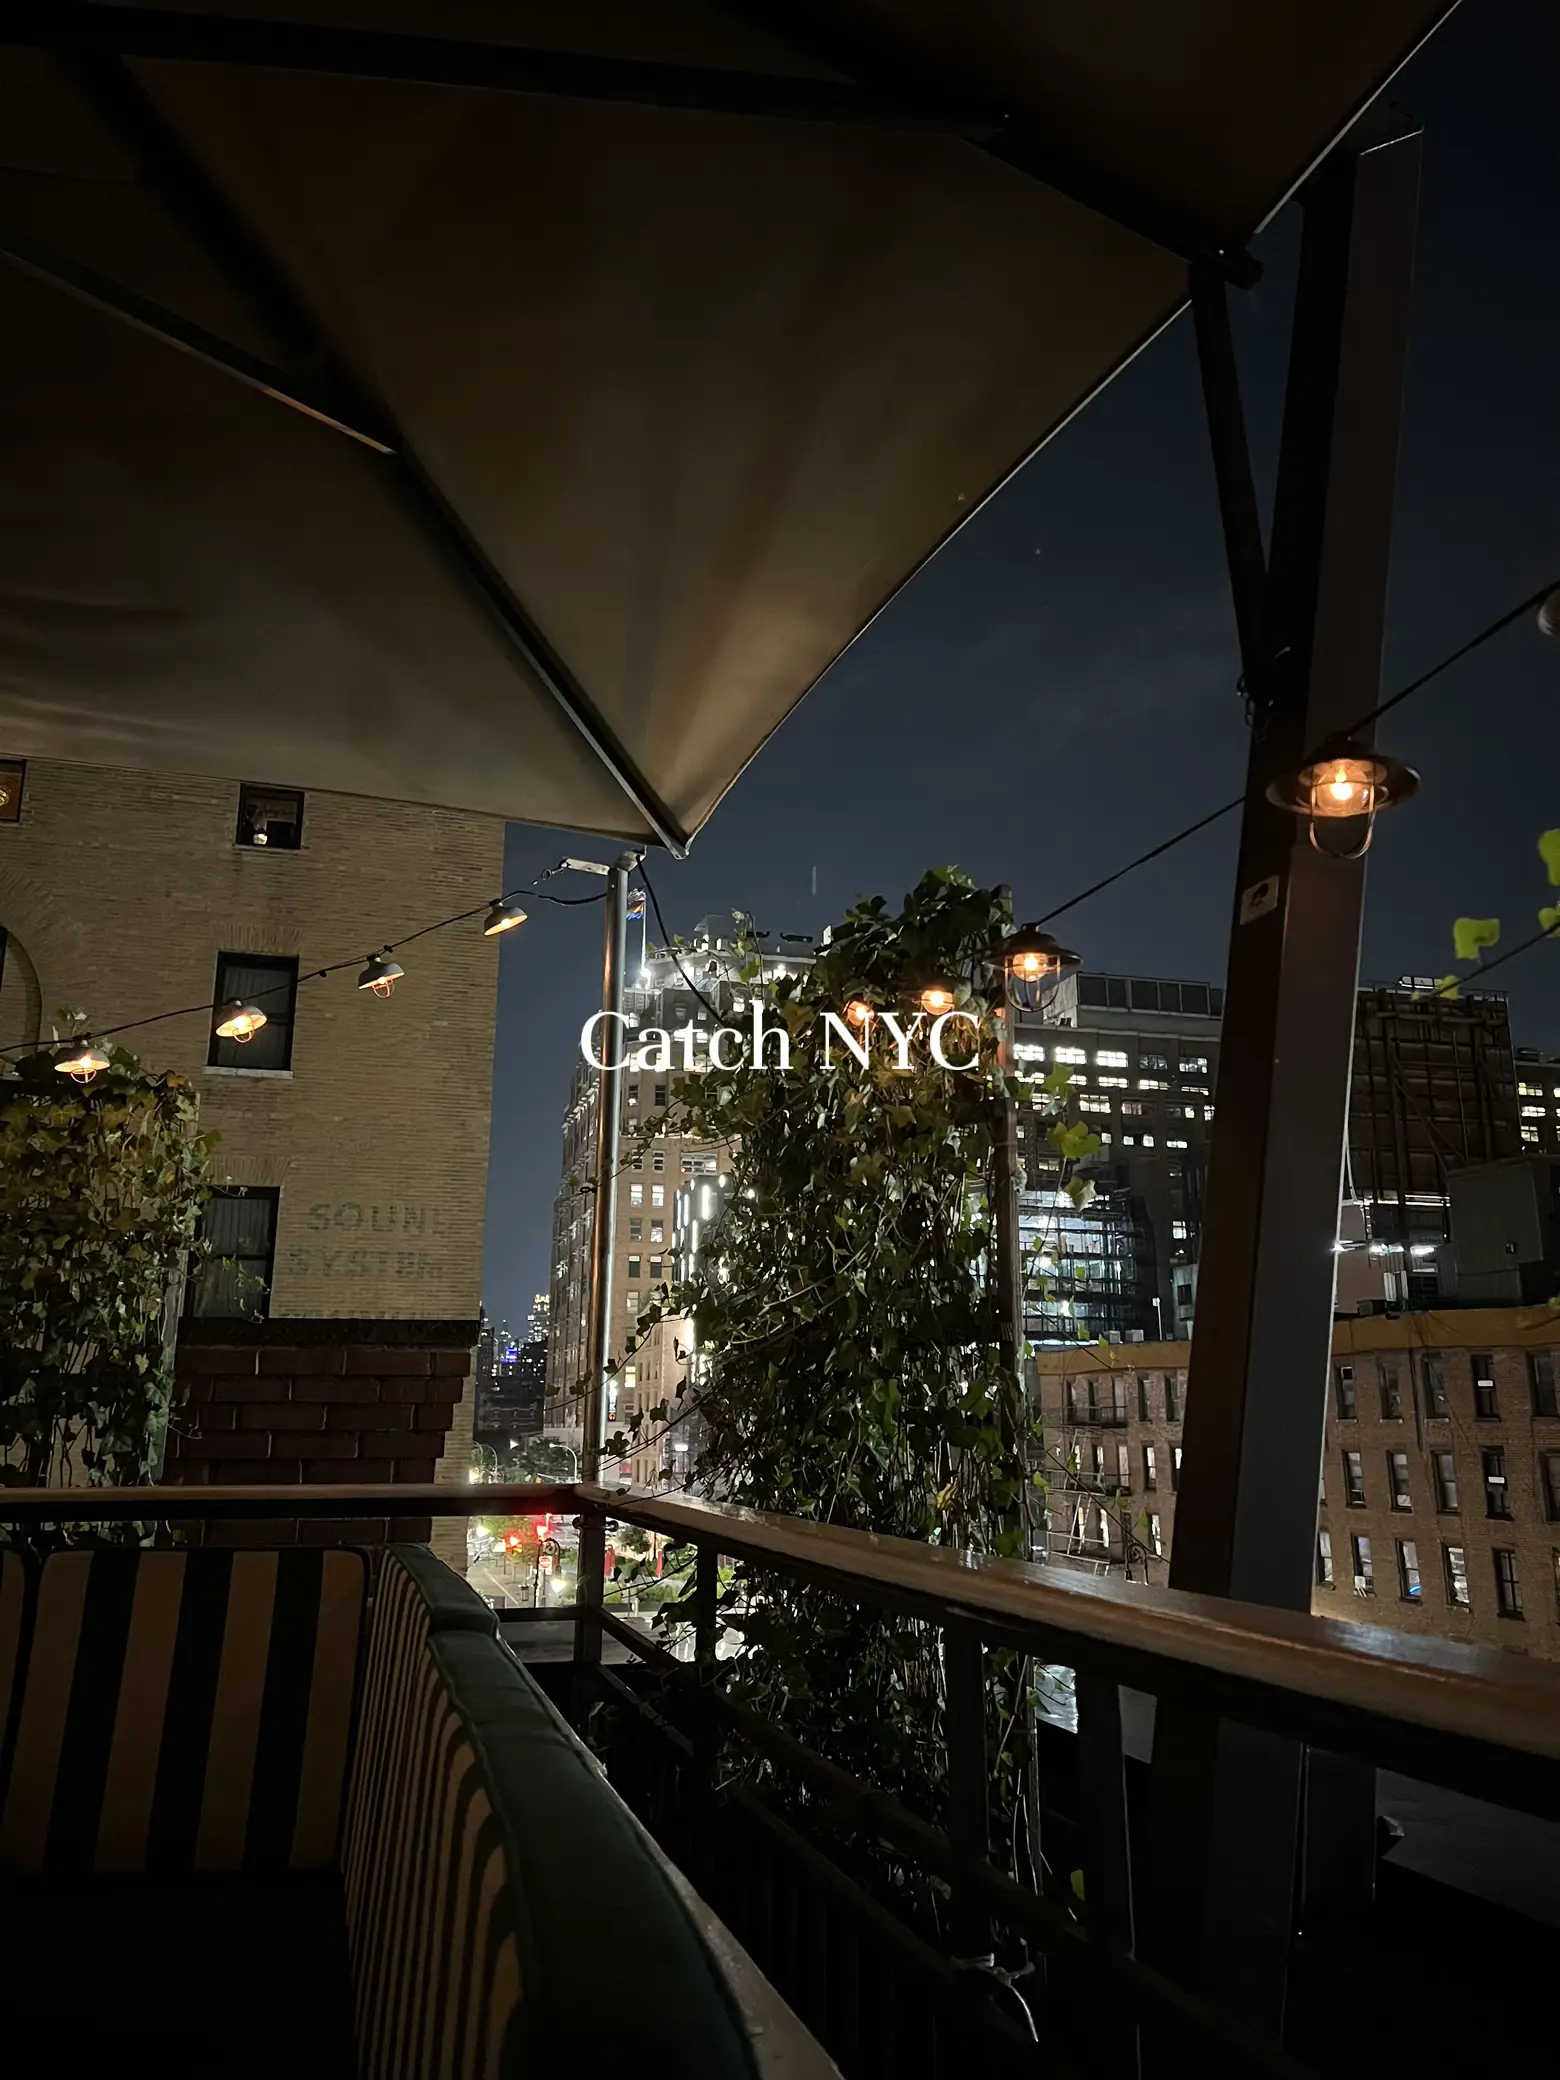  A view of a building at night with a patio and a tree. The patio has a striped couch and a chair. The building is lit up and has a sign that says "Catch NY".